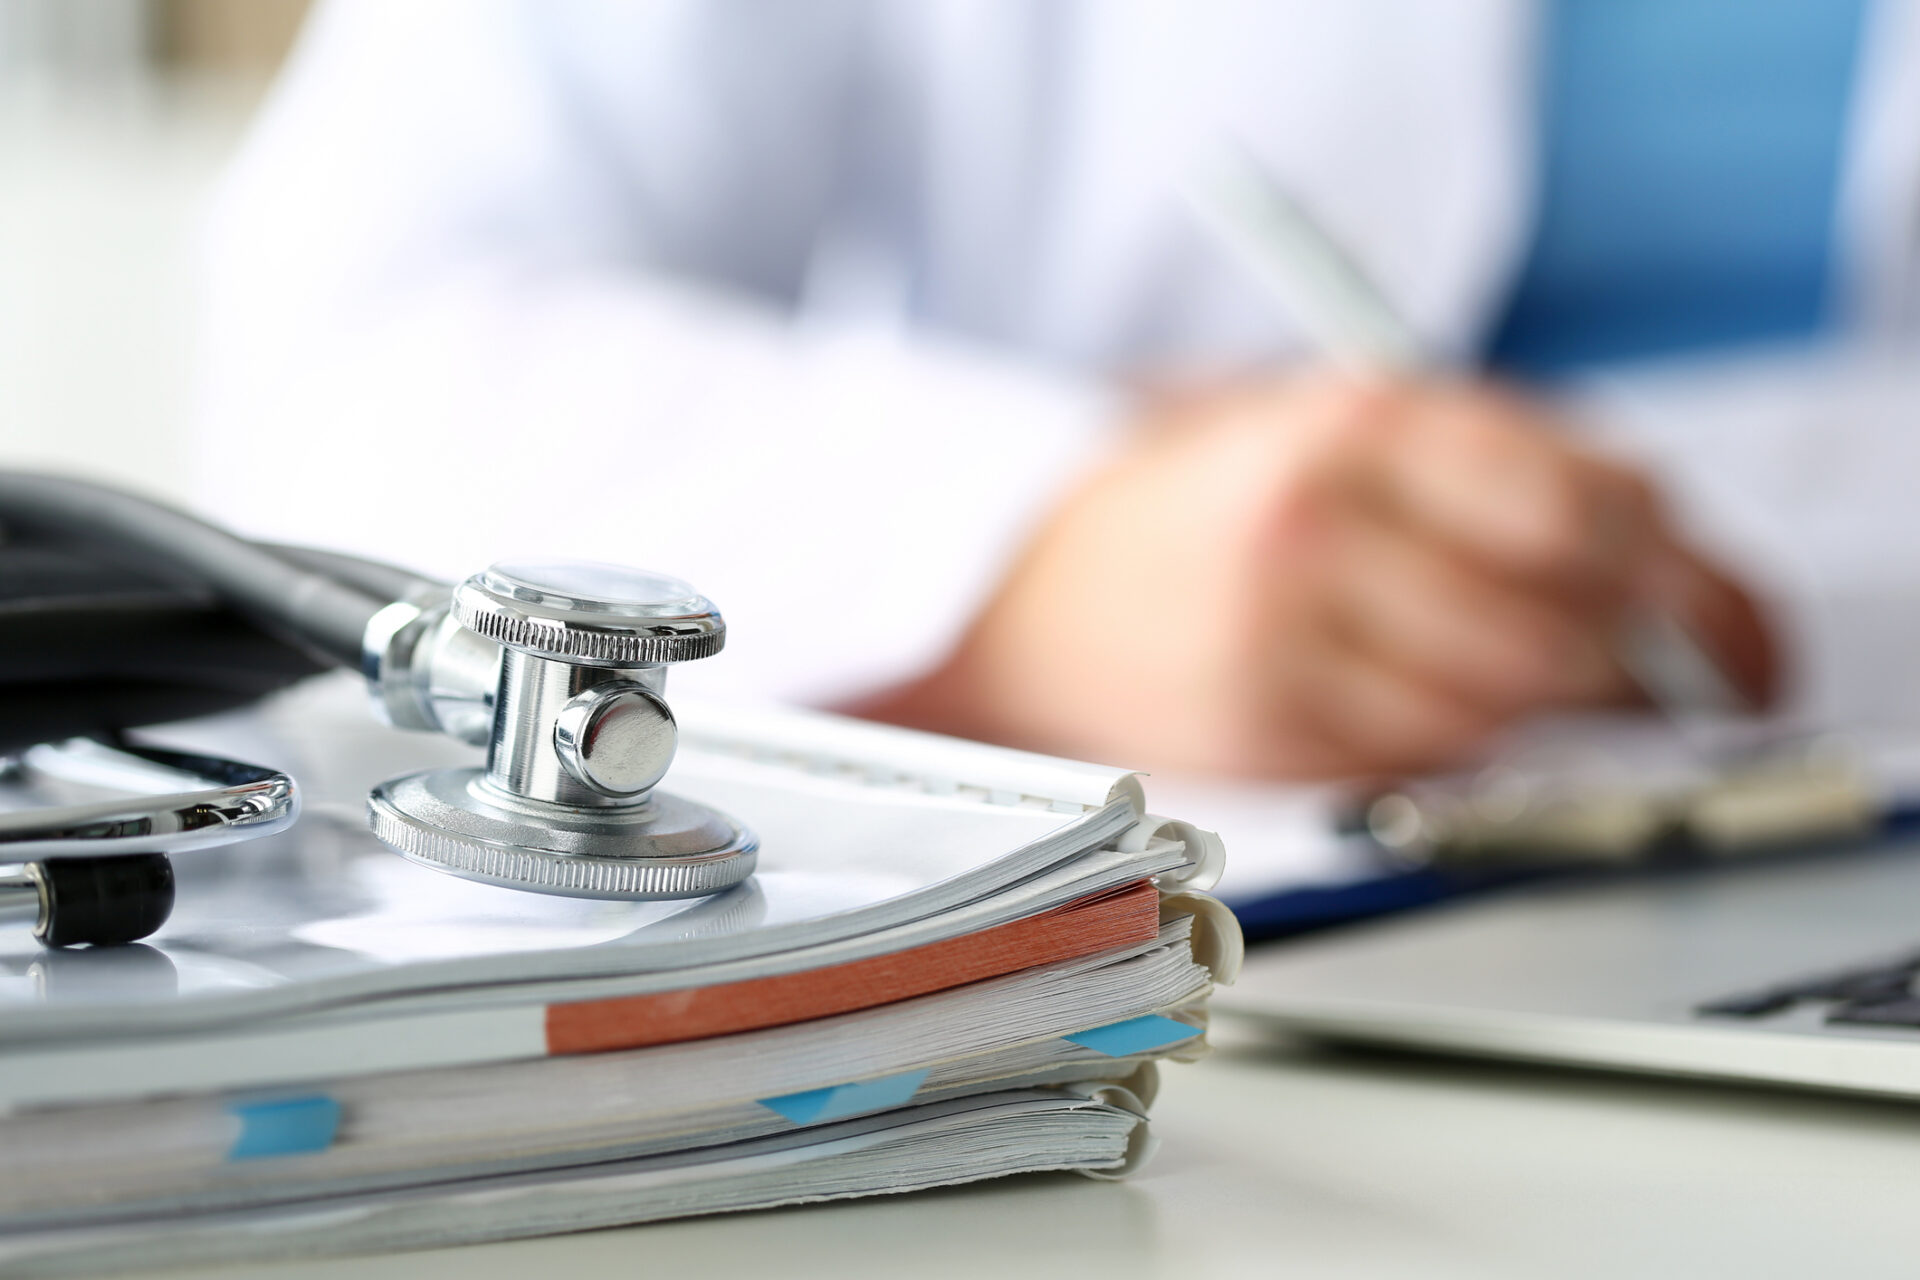 Earn stronger letters of recommendation with these tips from two New Jersey doctors.